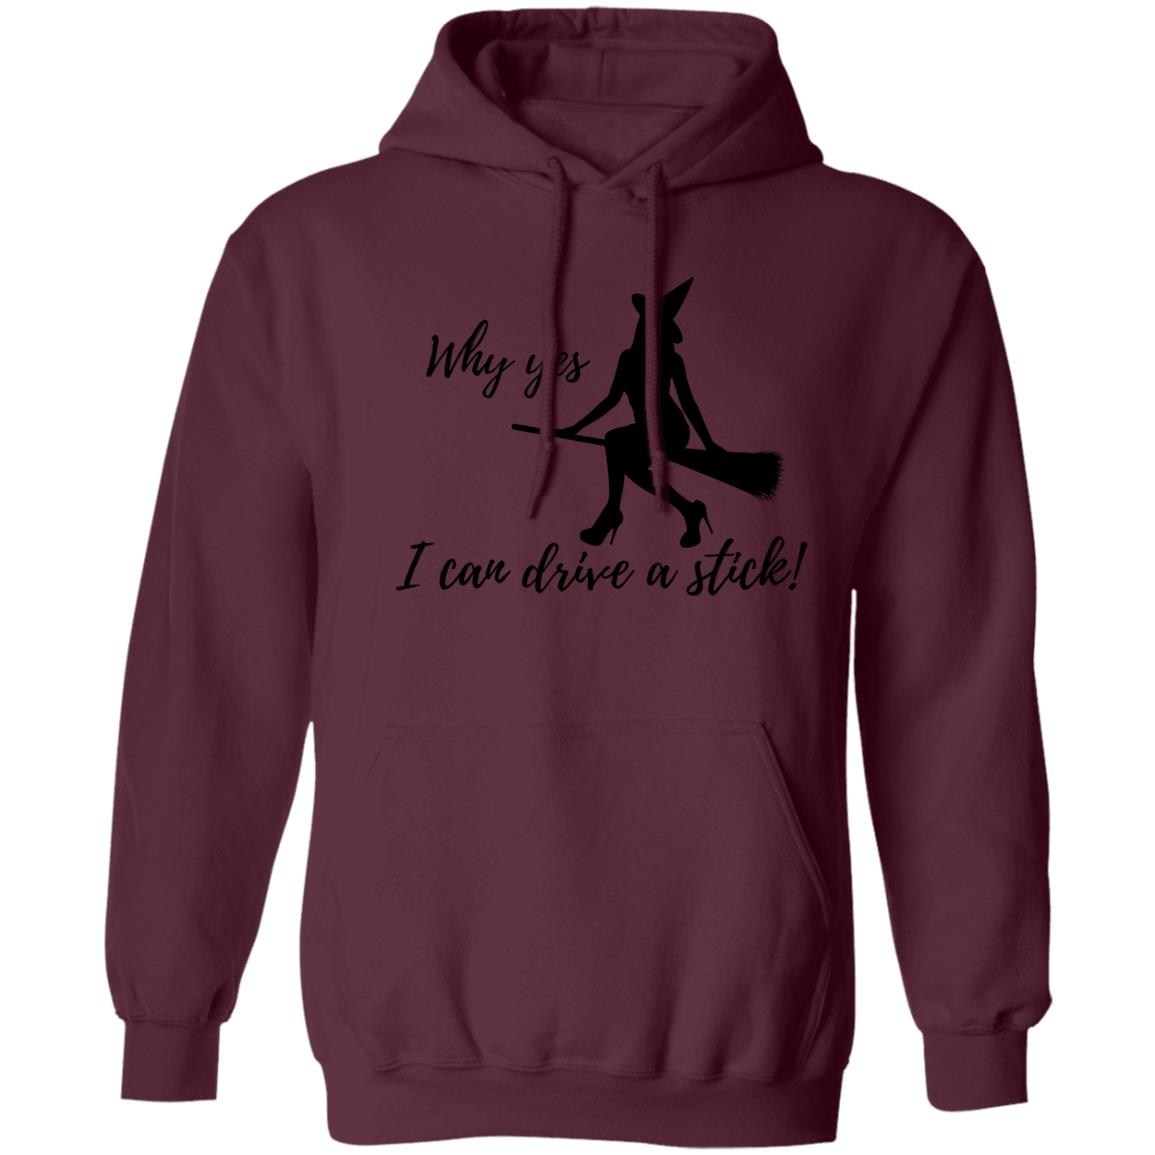 I can Drive a Stick - Halloween -Z66x Pullover Hoodie